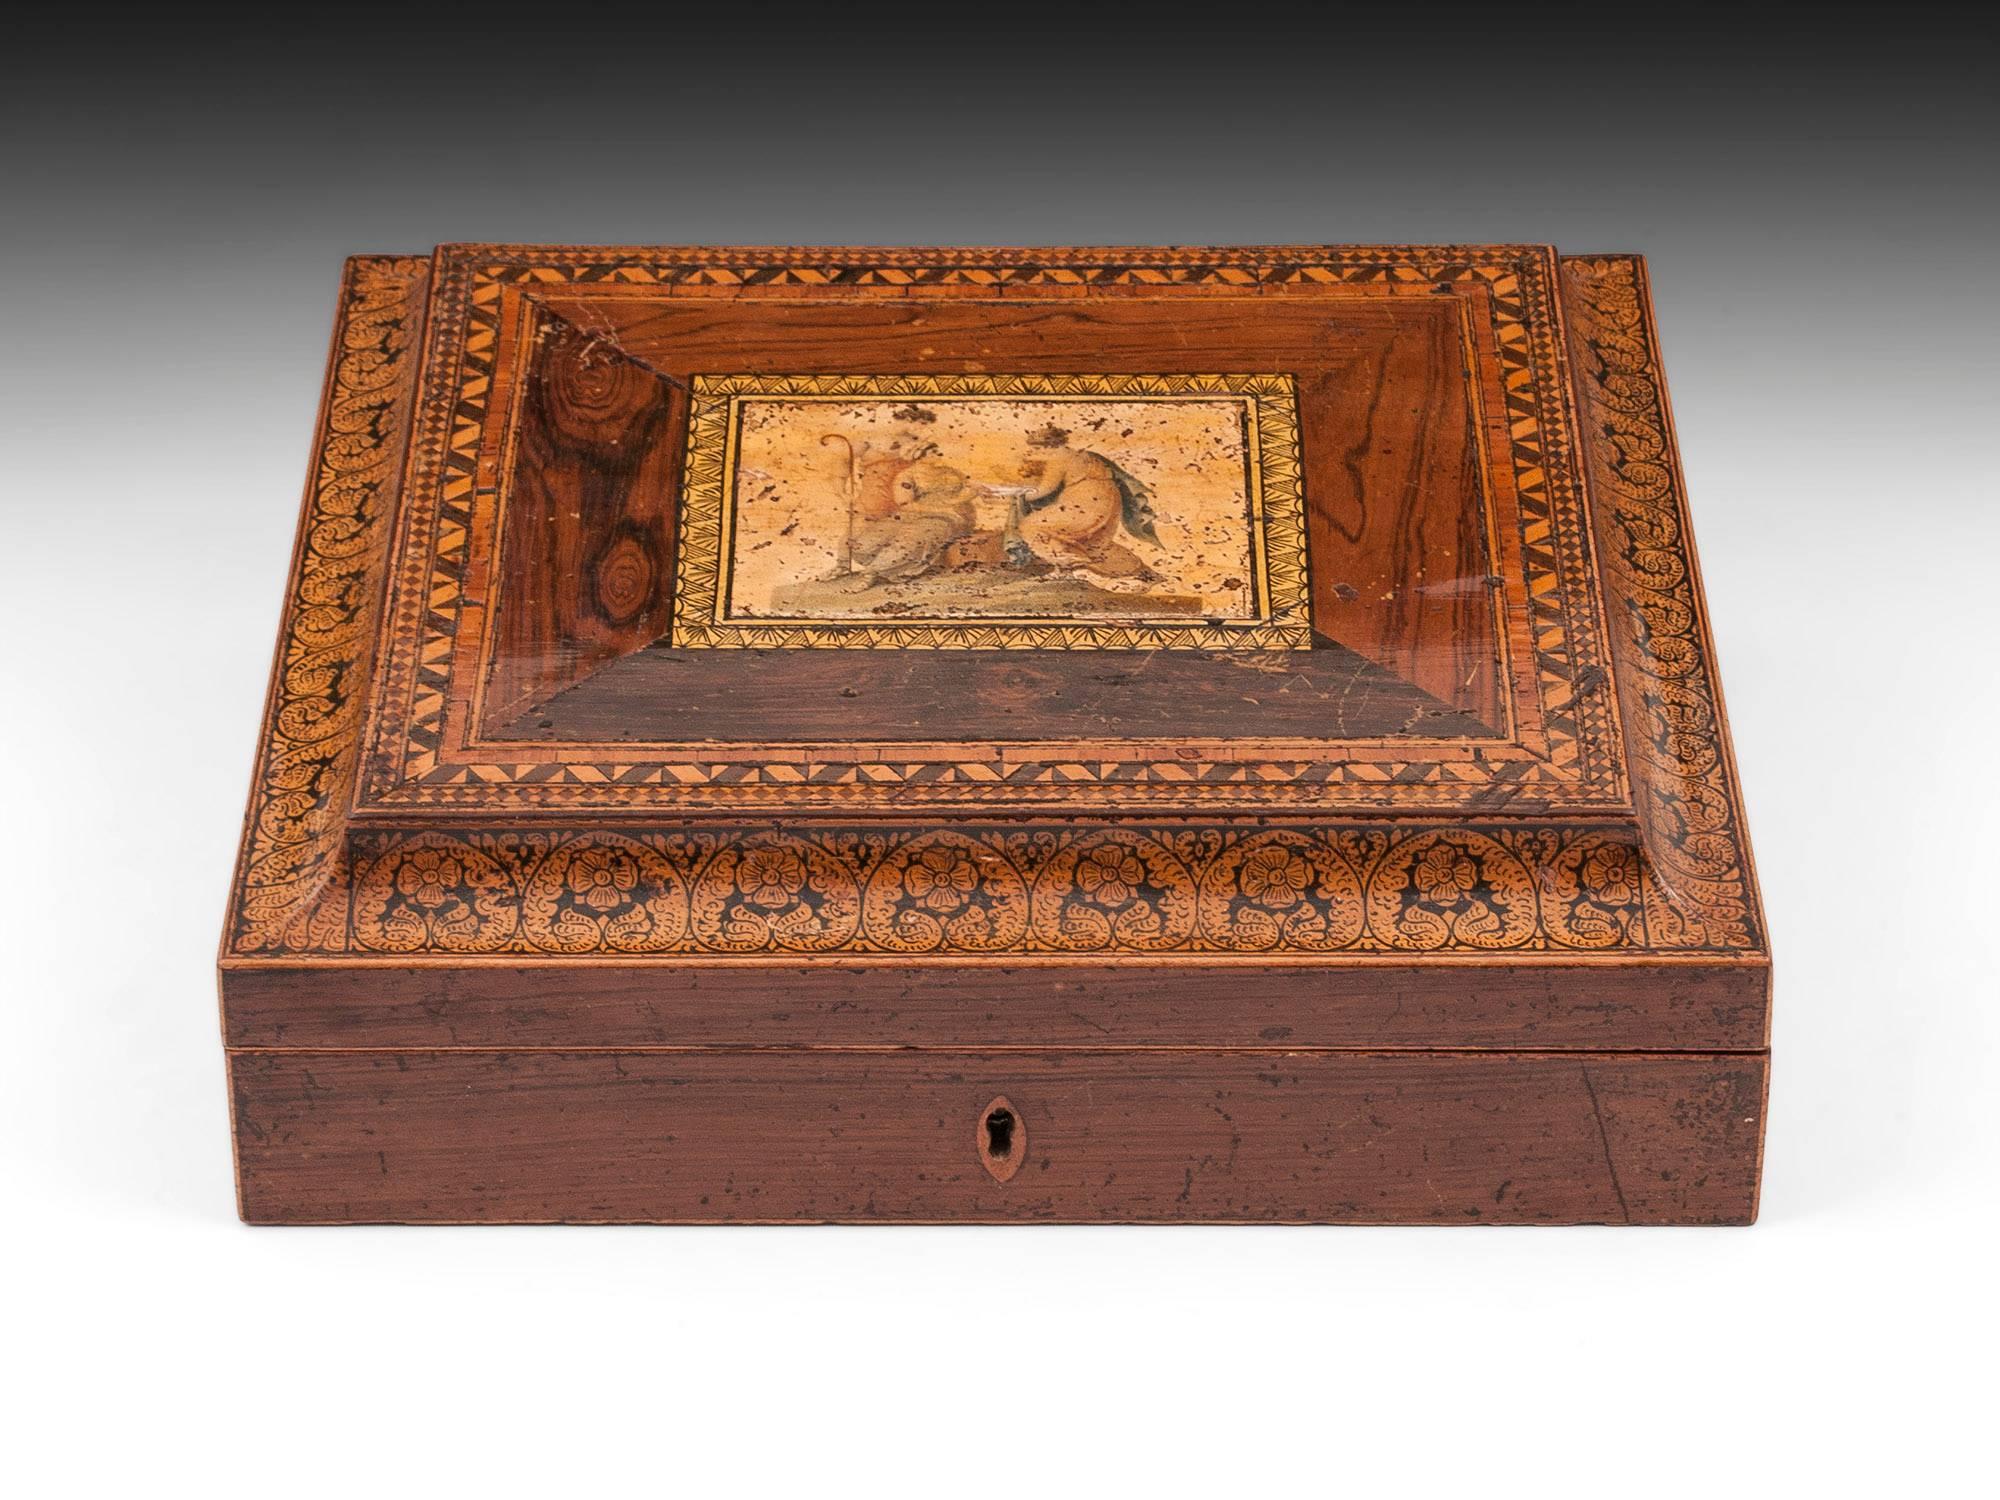 Antique writing box. The top has a penwork border and is adorned with a beautiful colored print depicting "infant Bacchus delivered to Nymphs on Mount IDA".

The interior of this early writing slope is lined with pink paper and features